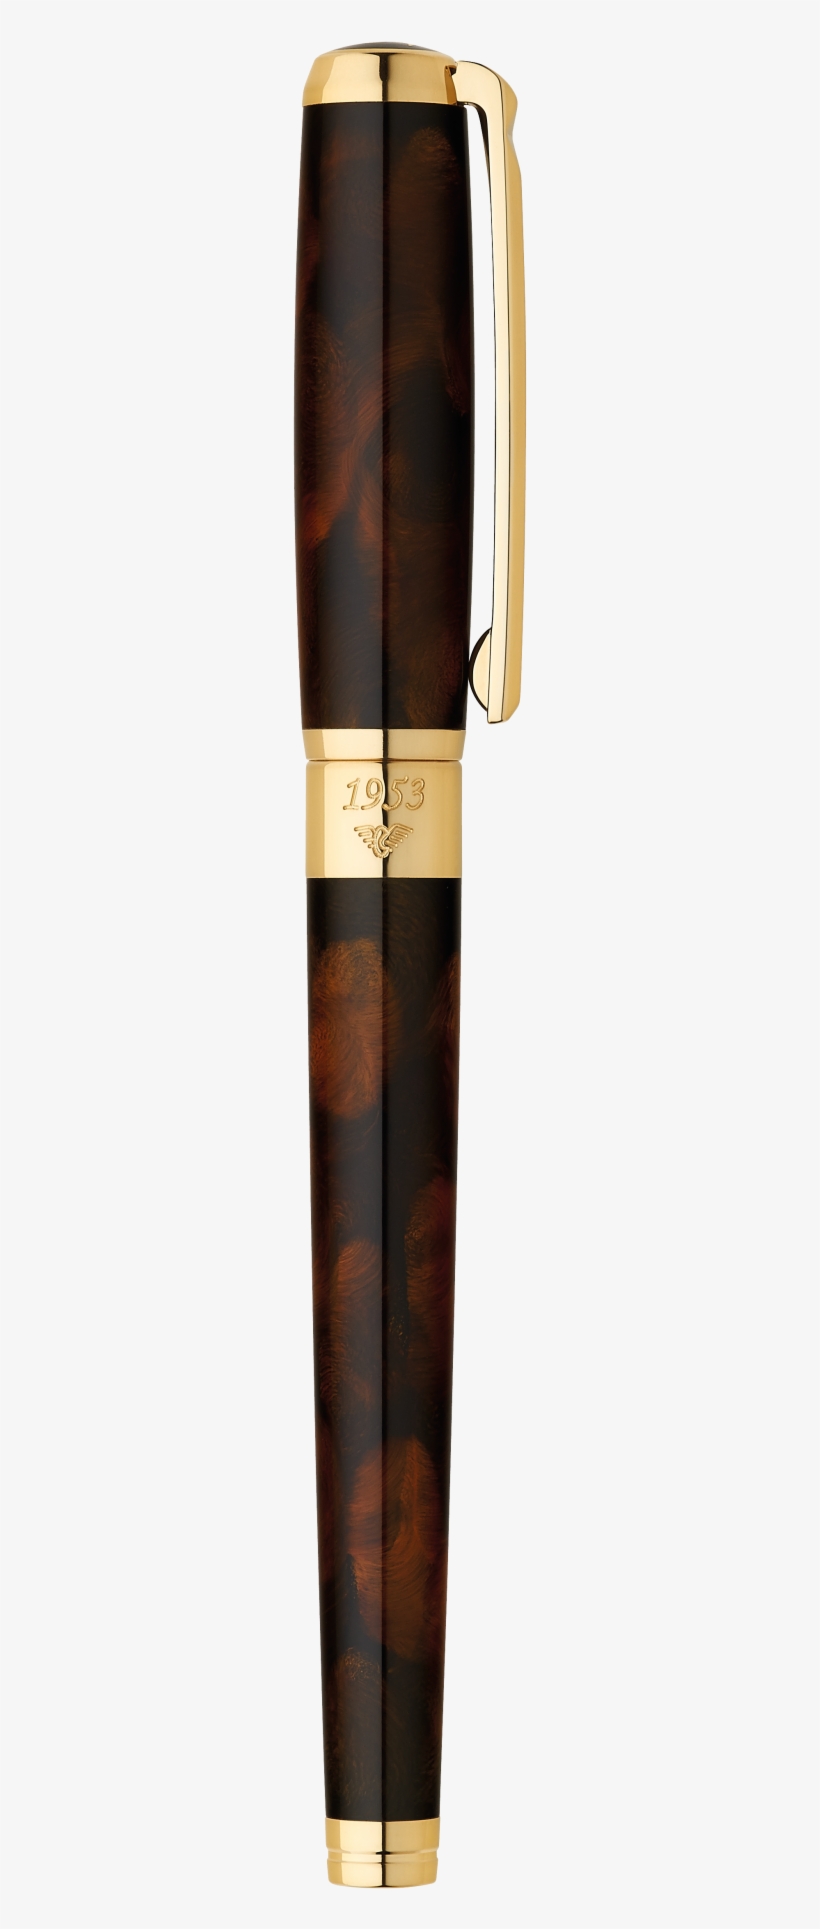 Old Fountain Pen Png - Fountain Pen, transparent png #2620391